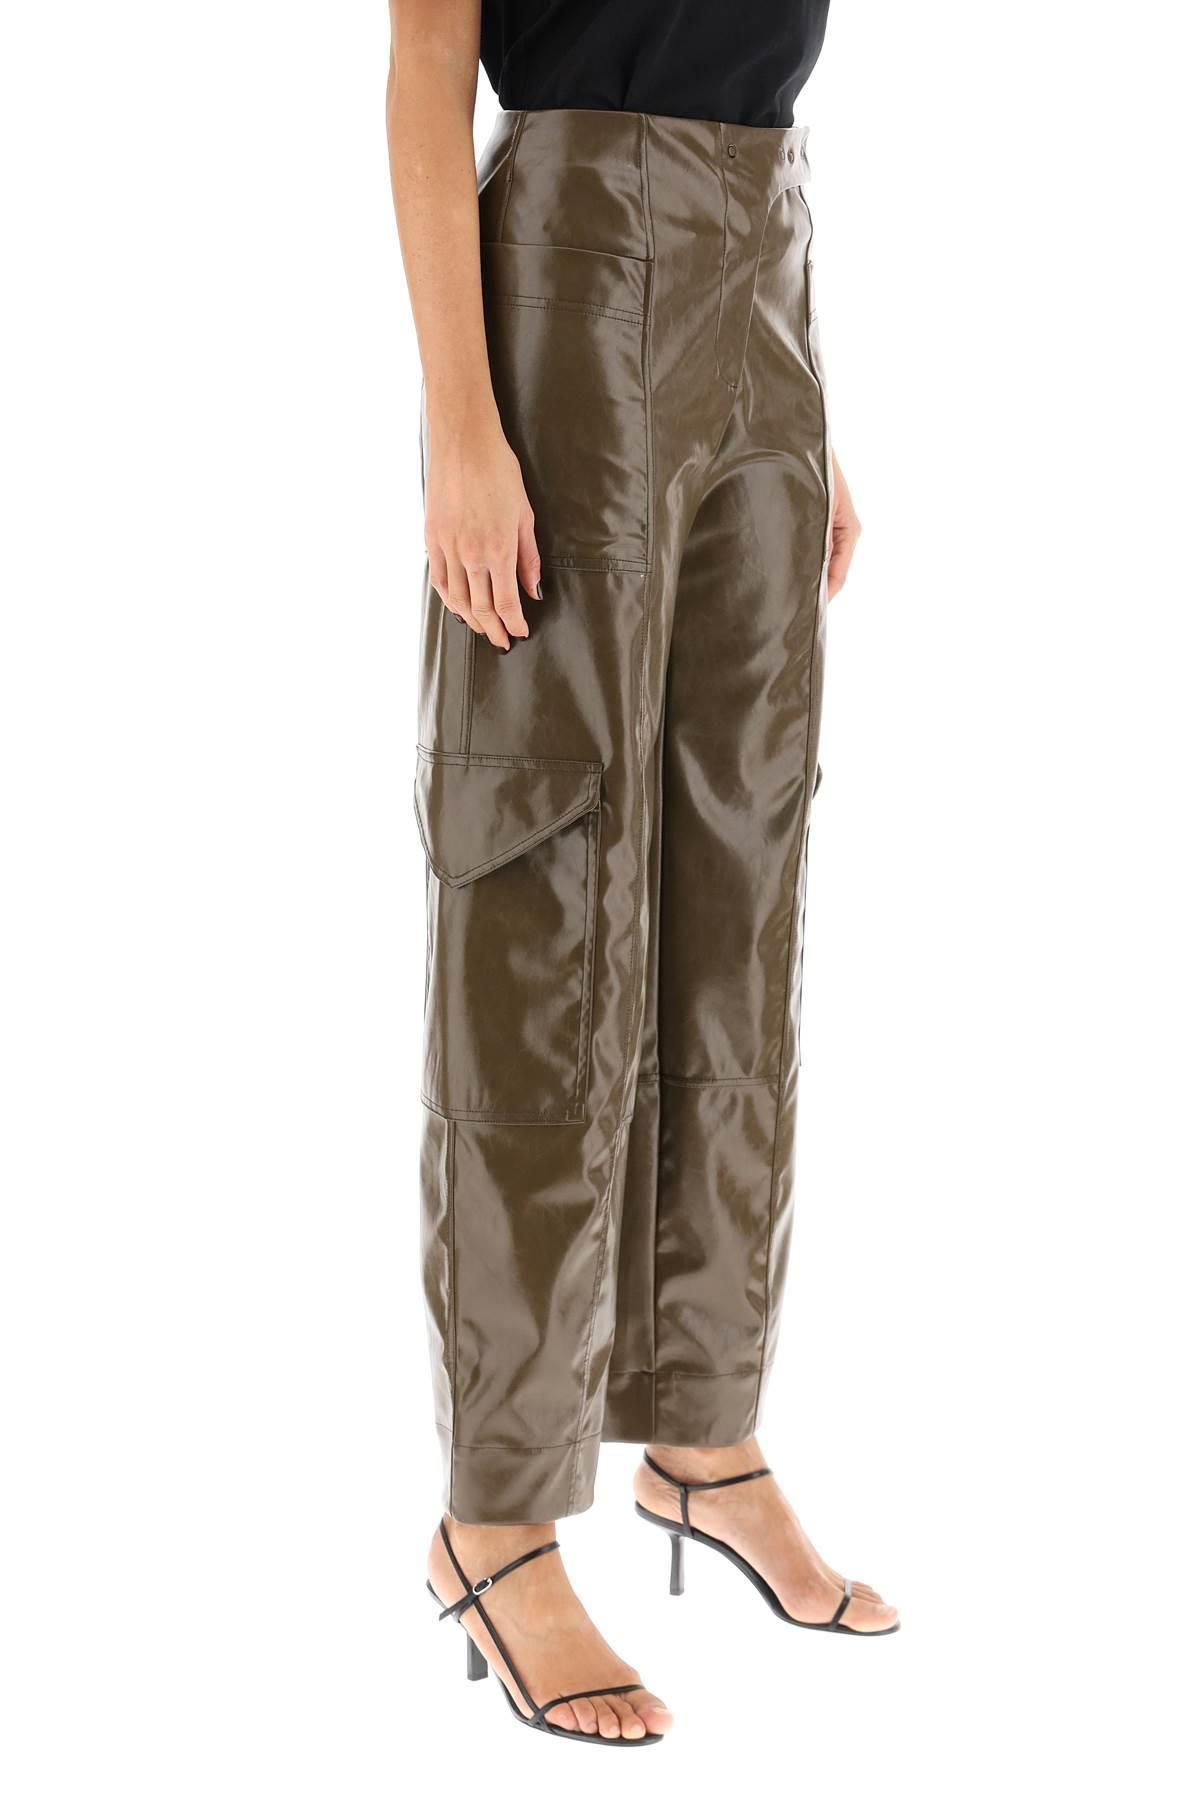 Ganni Faux Leather Cargo Pants in Natural | Lyst